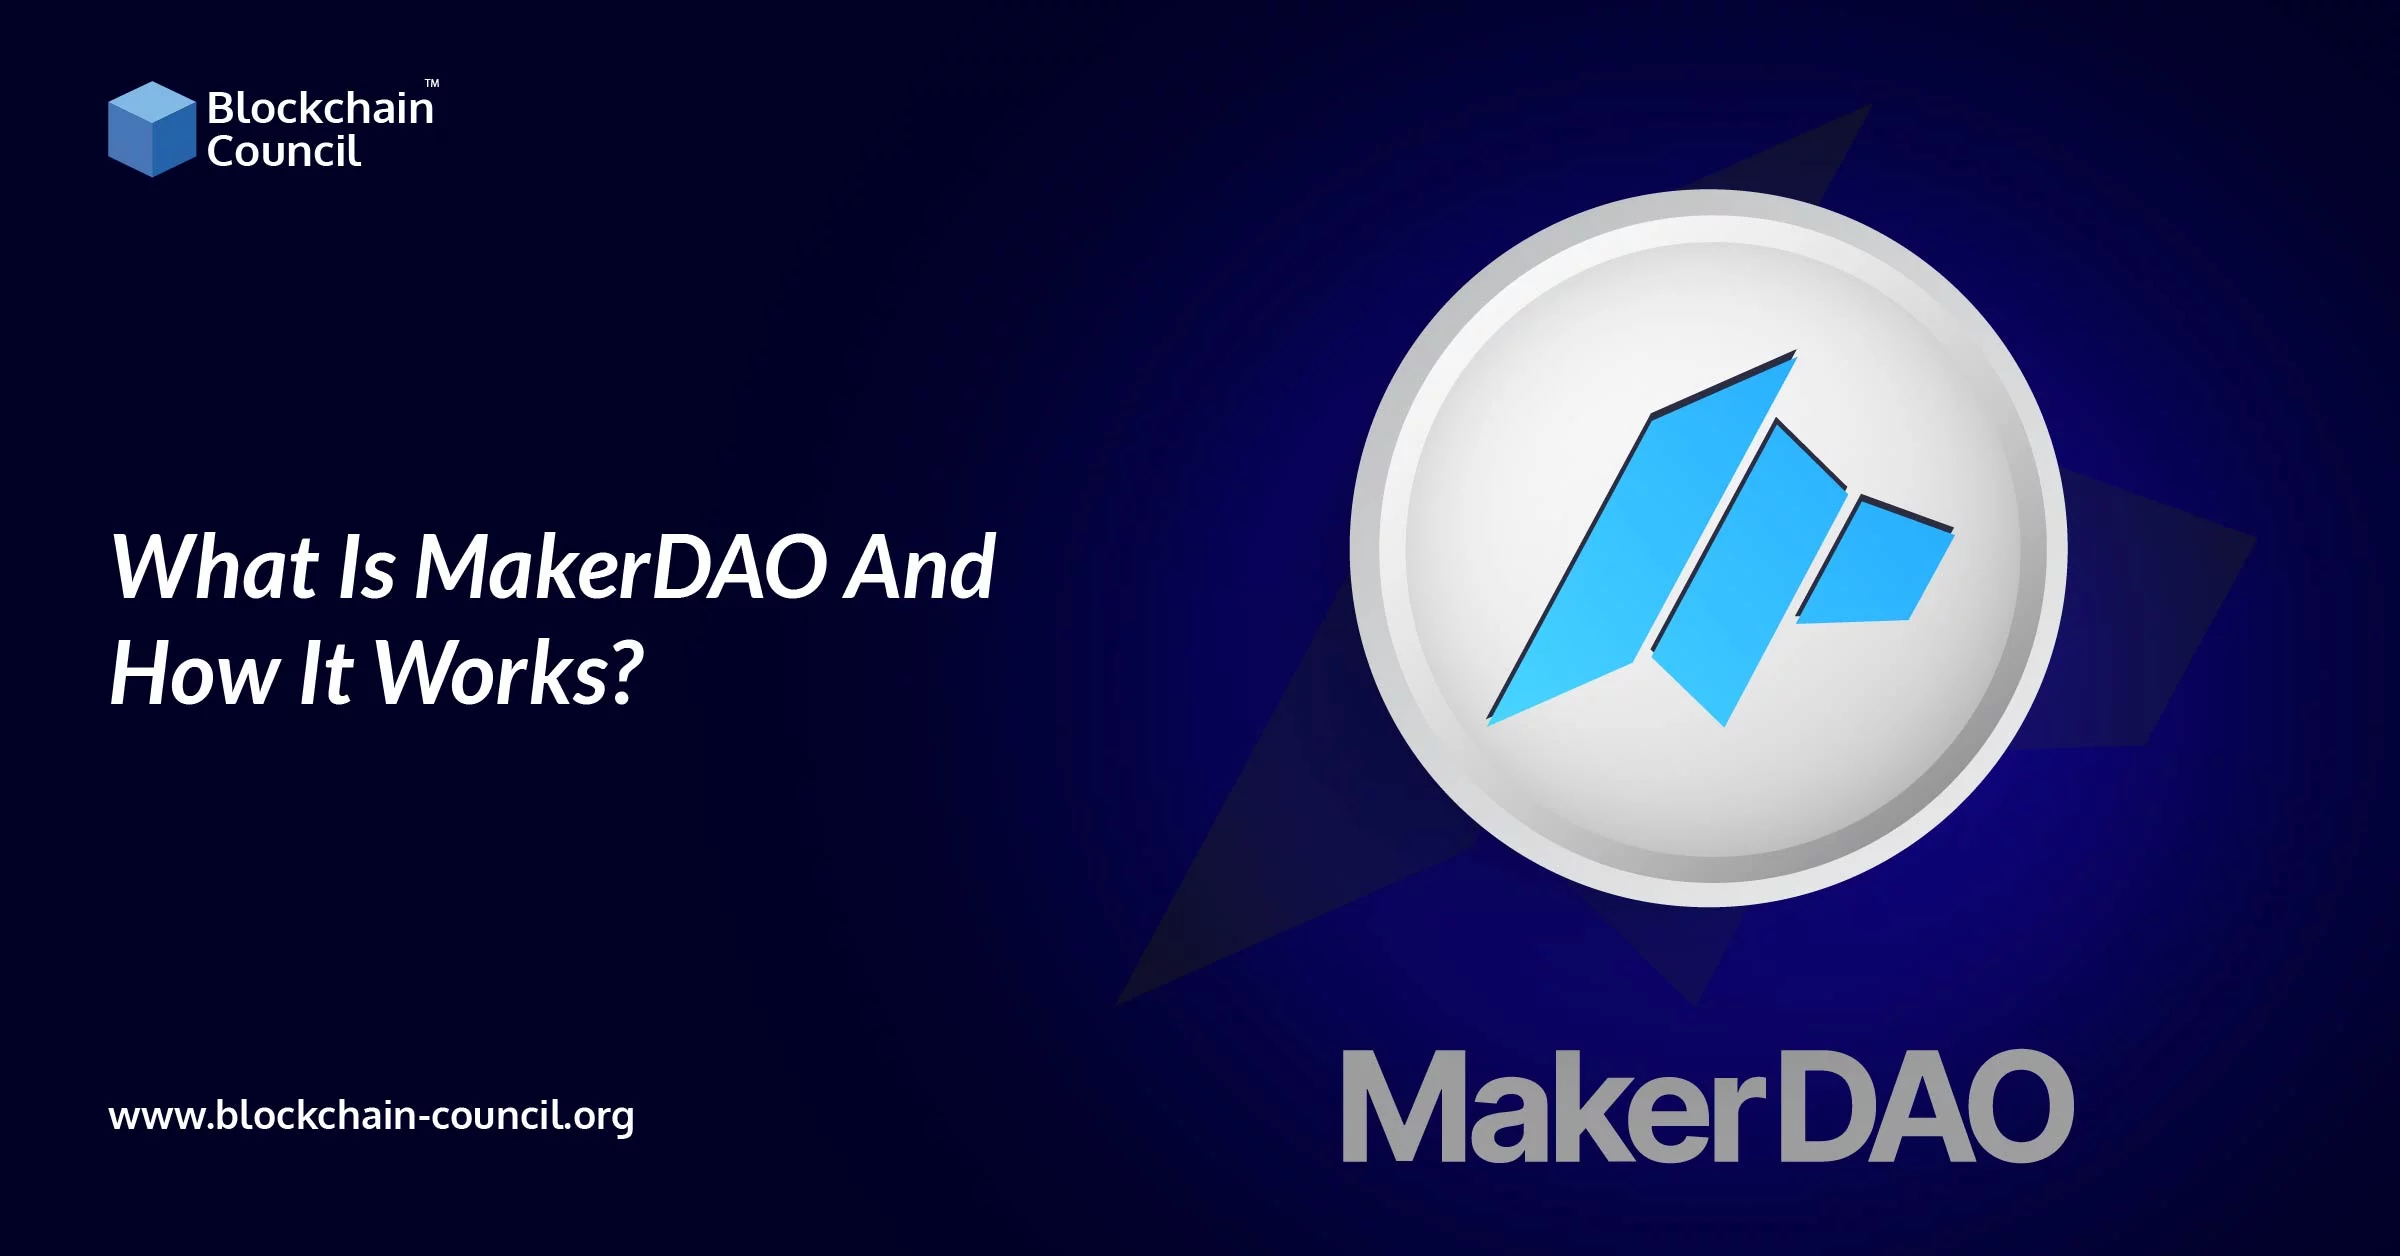 What Is MakerDAO And How It Works